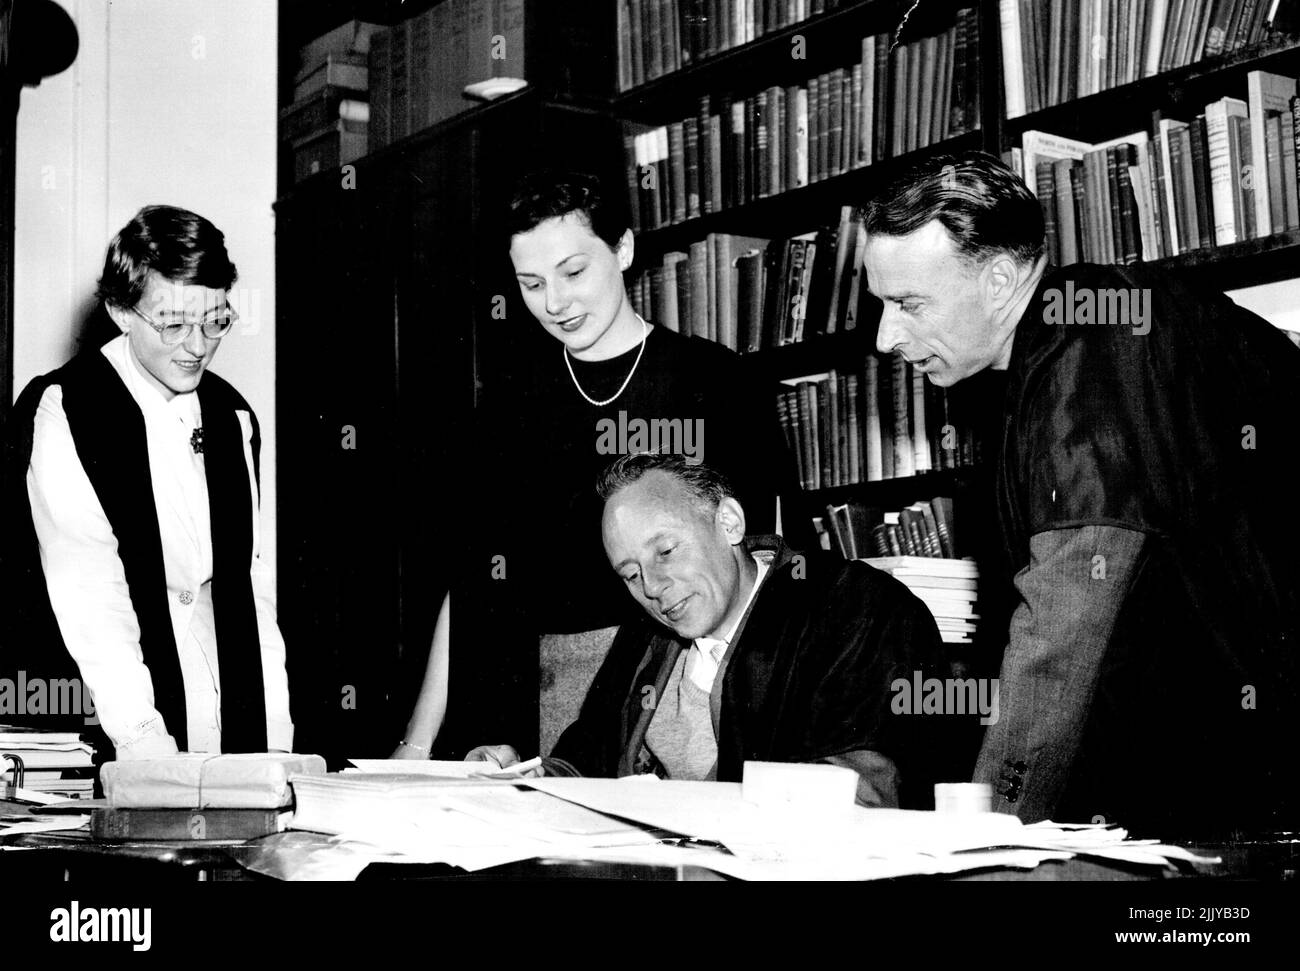 Teaching follows Alison Jones and Jennifer Davidson smile with professors Mitchell and Milgate (right) at the latest quip on accents. November 4, 1955. Stock Photo